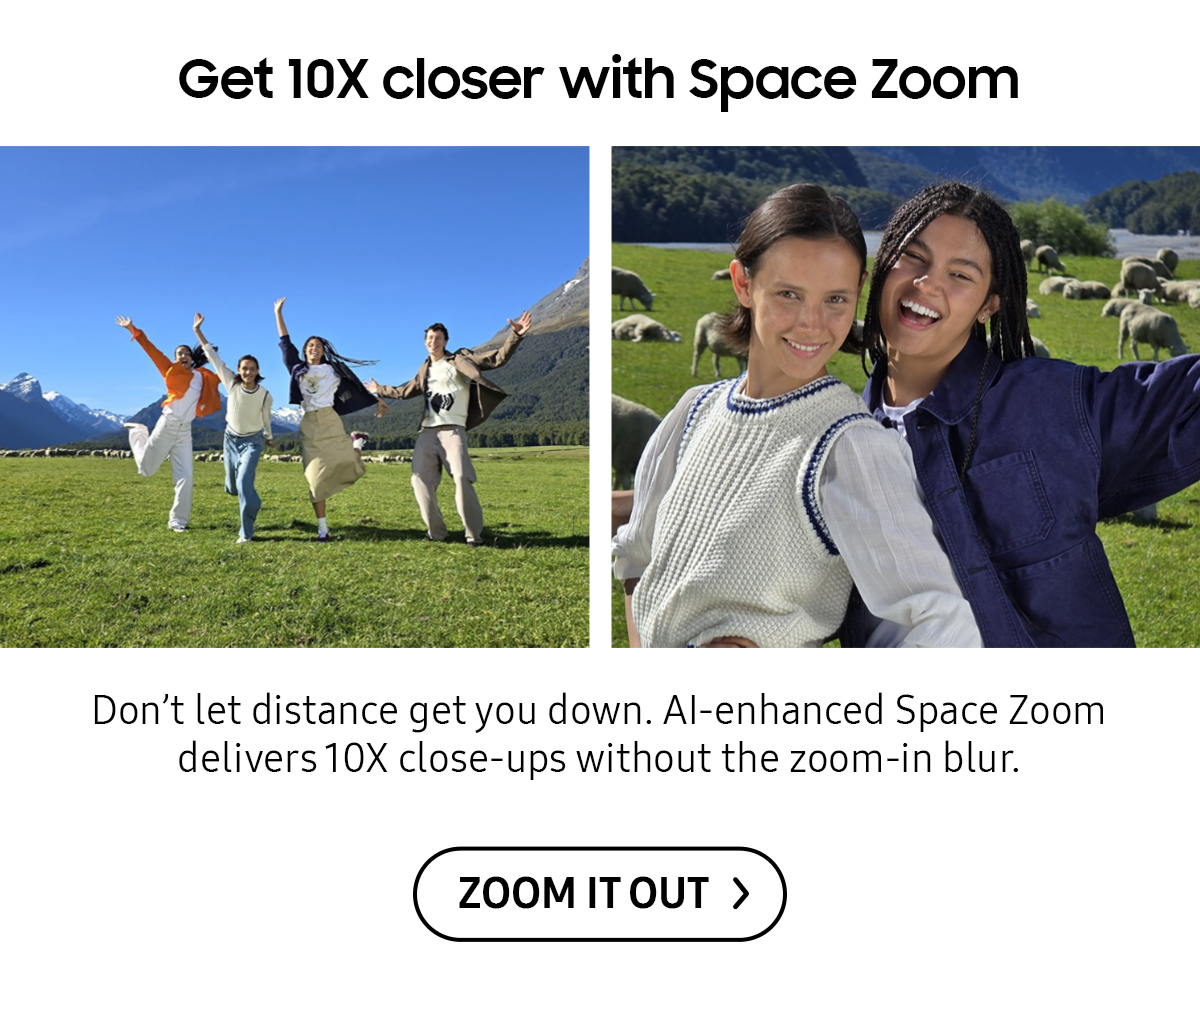 Get 10X closer with Space Zoom | Don't let distance get you down. Al-enhanced Space Zoom delivers 10X close-ups without the zoom-in blur.